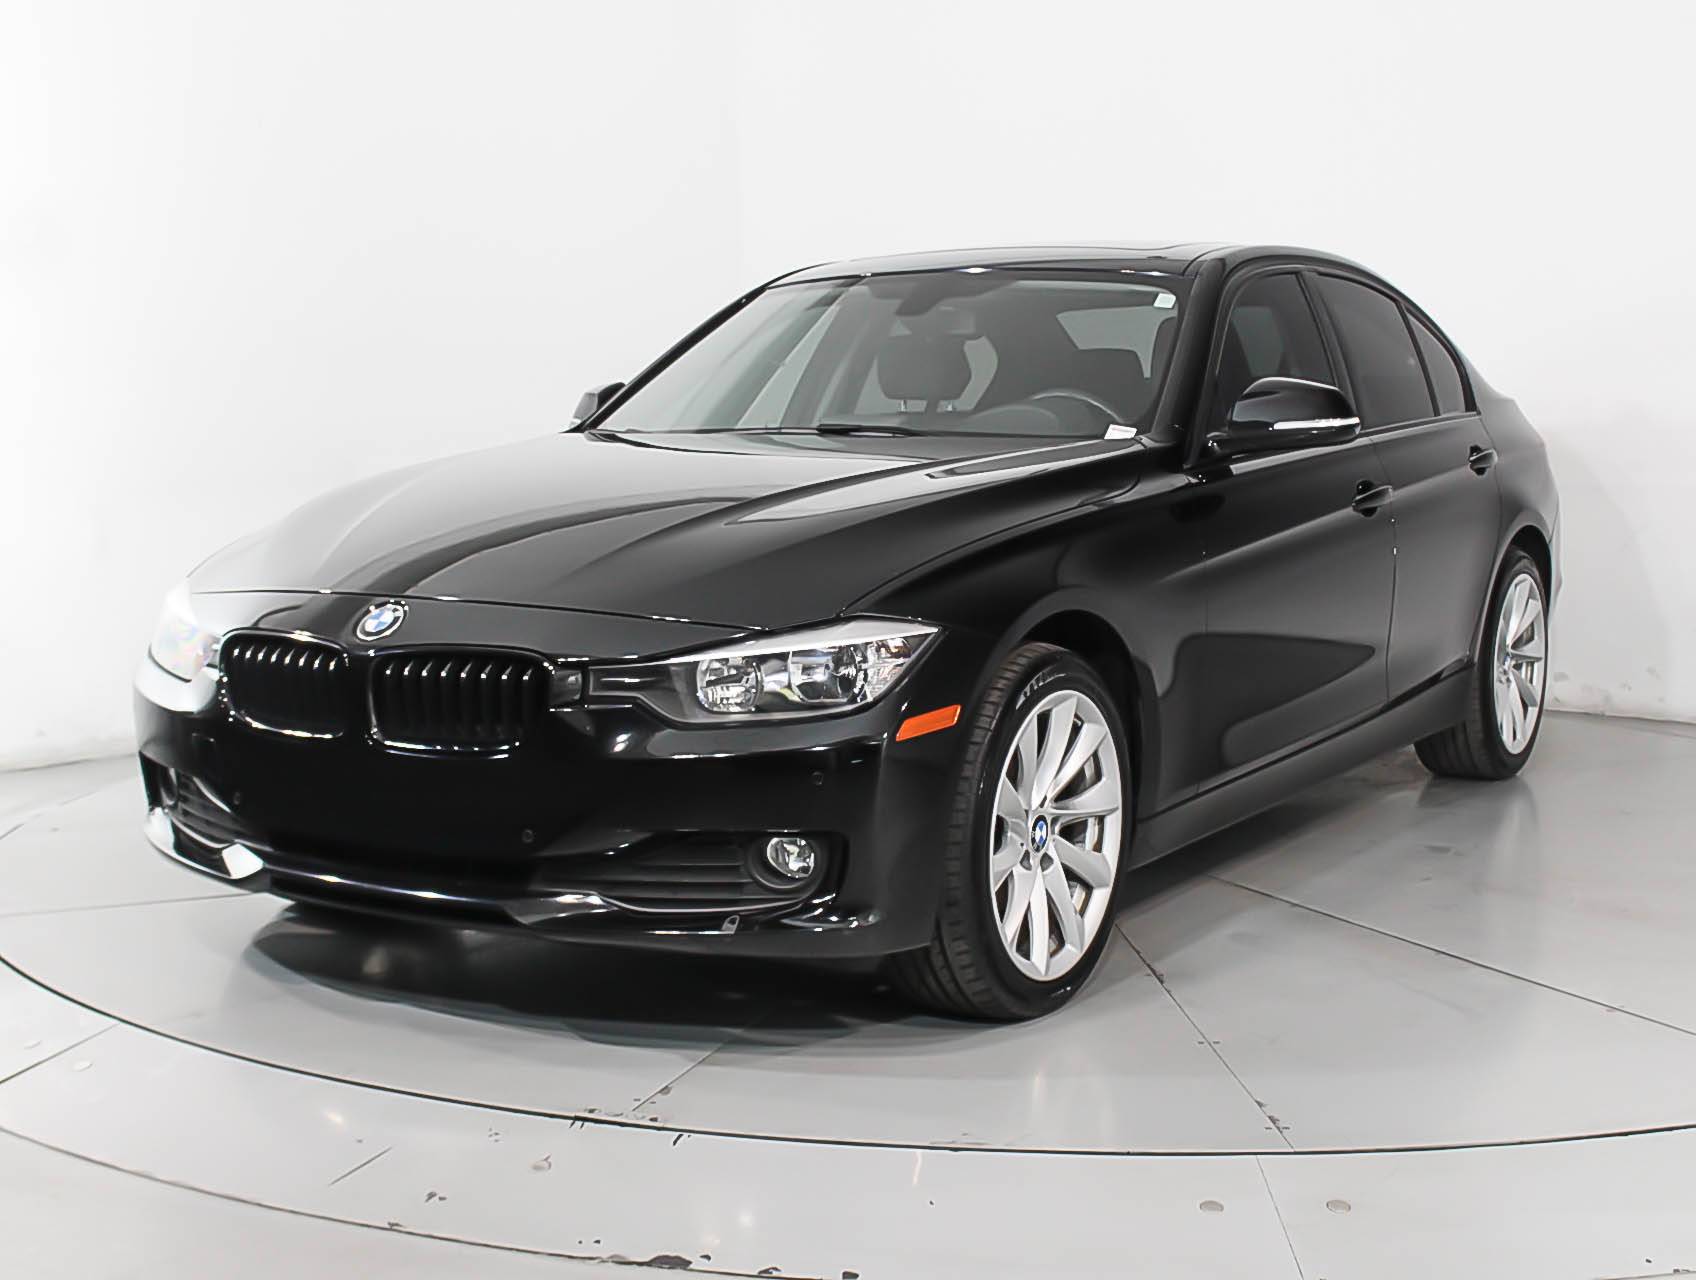 Used 2015 BMW 3 SERIES 320I for sale in MIAMI | 102260